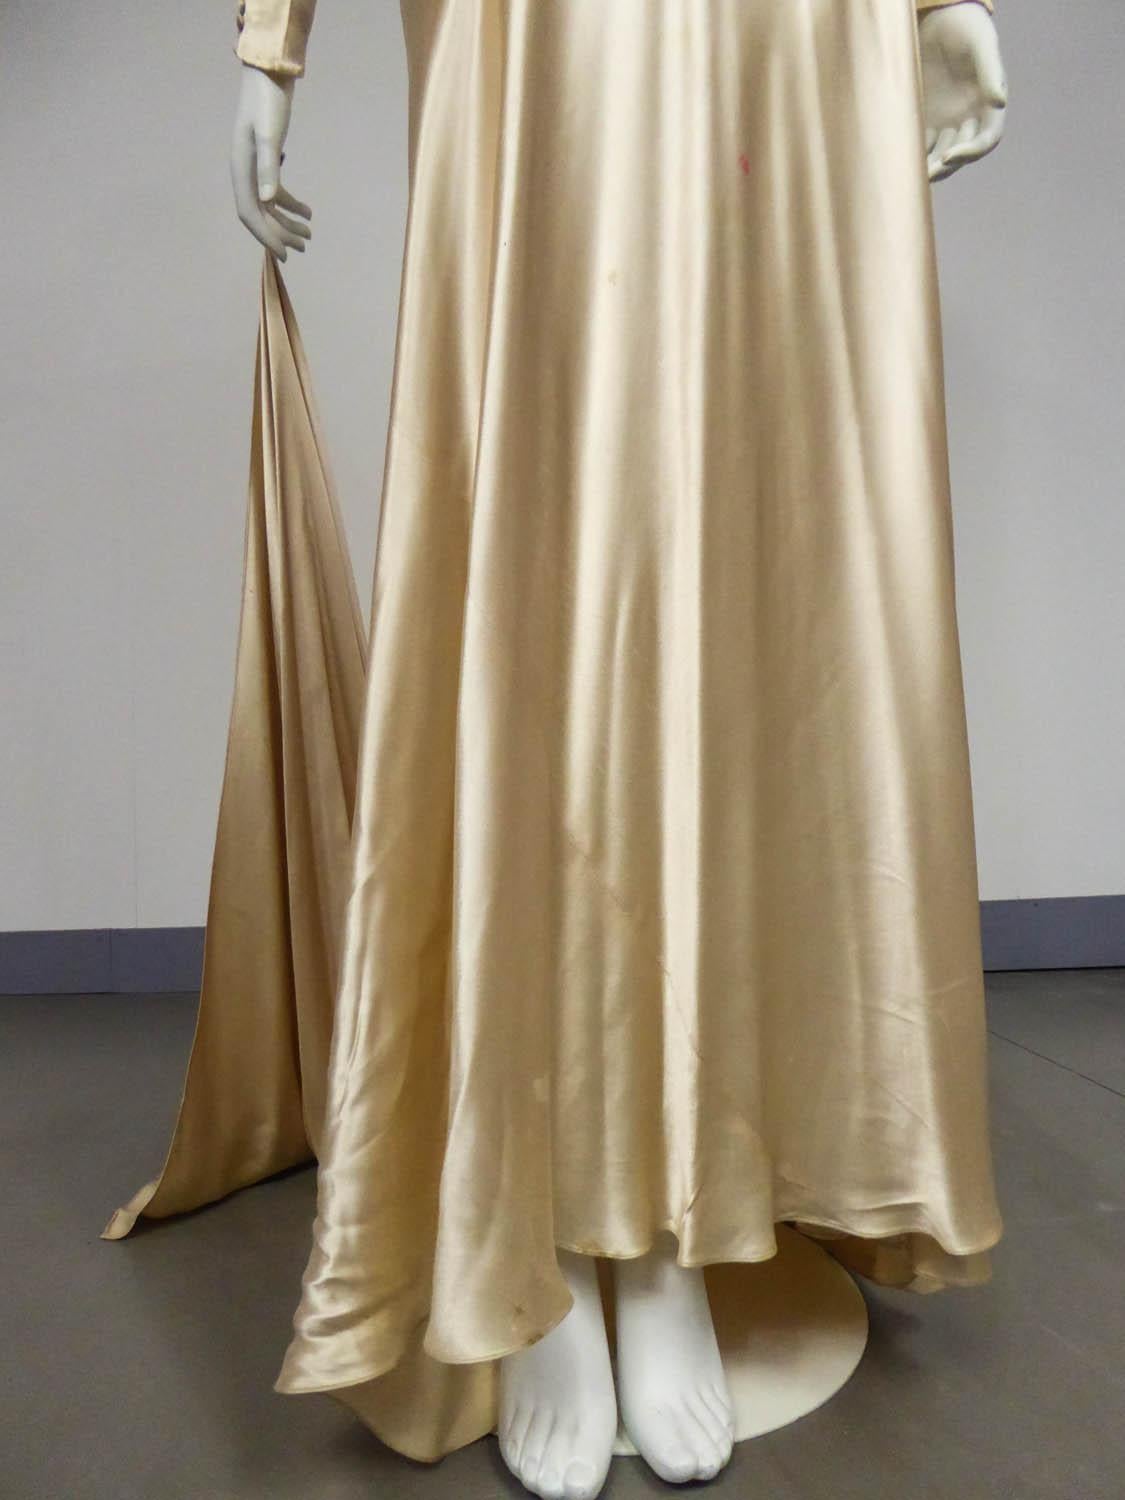 Circa 1935/1945
France

Wedding dress in champagne silk satin from the late 1930s. Fluid and skin-tight cut in bias with a pleated work on the chest highlighting a sheath silhouette. Long sleeves adorned with a long row of matching buttons and